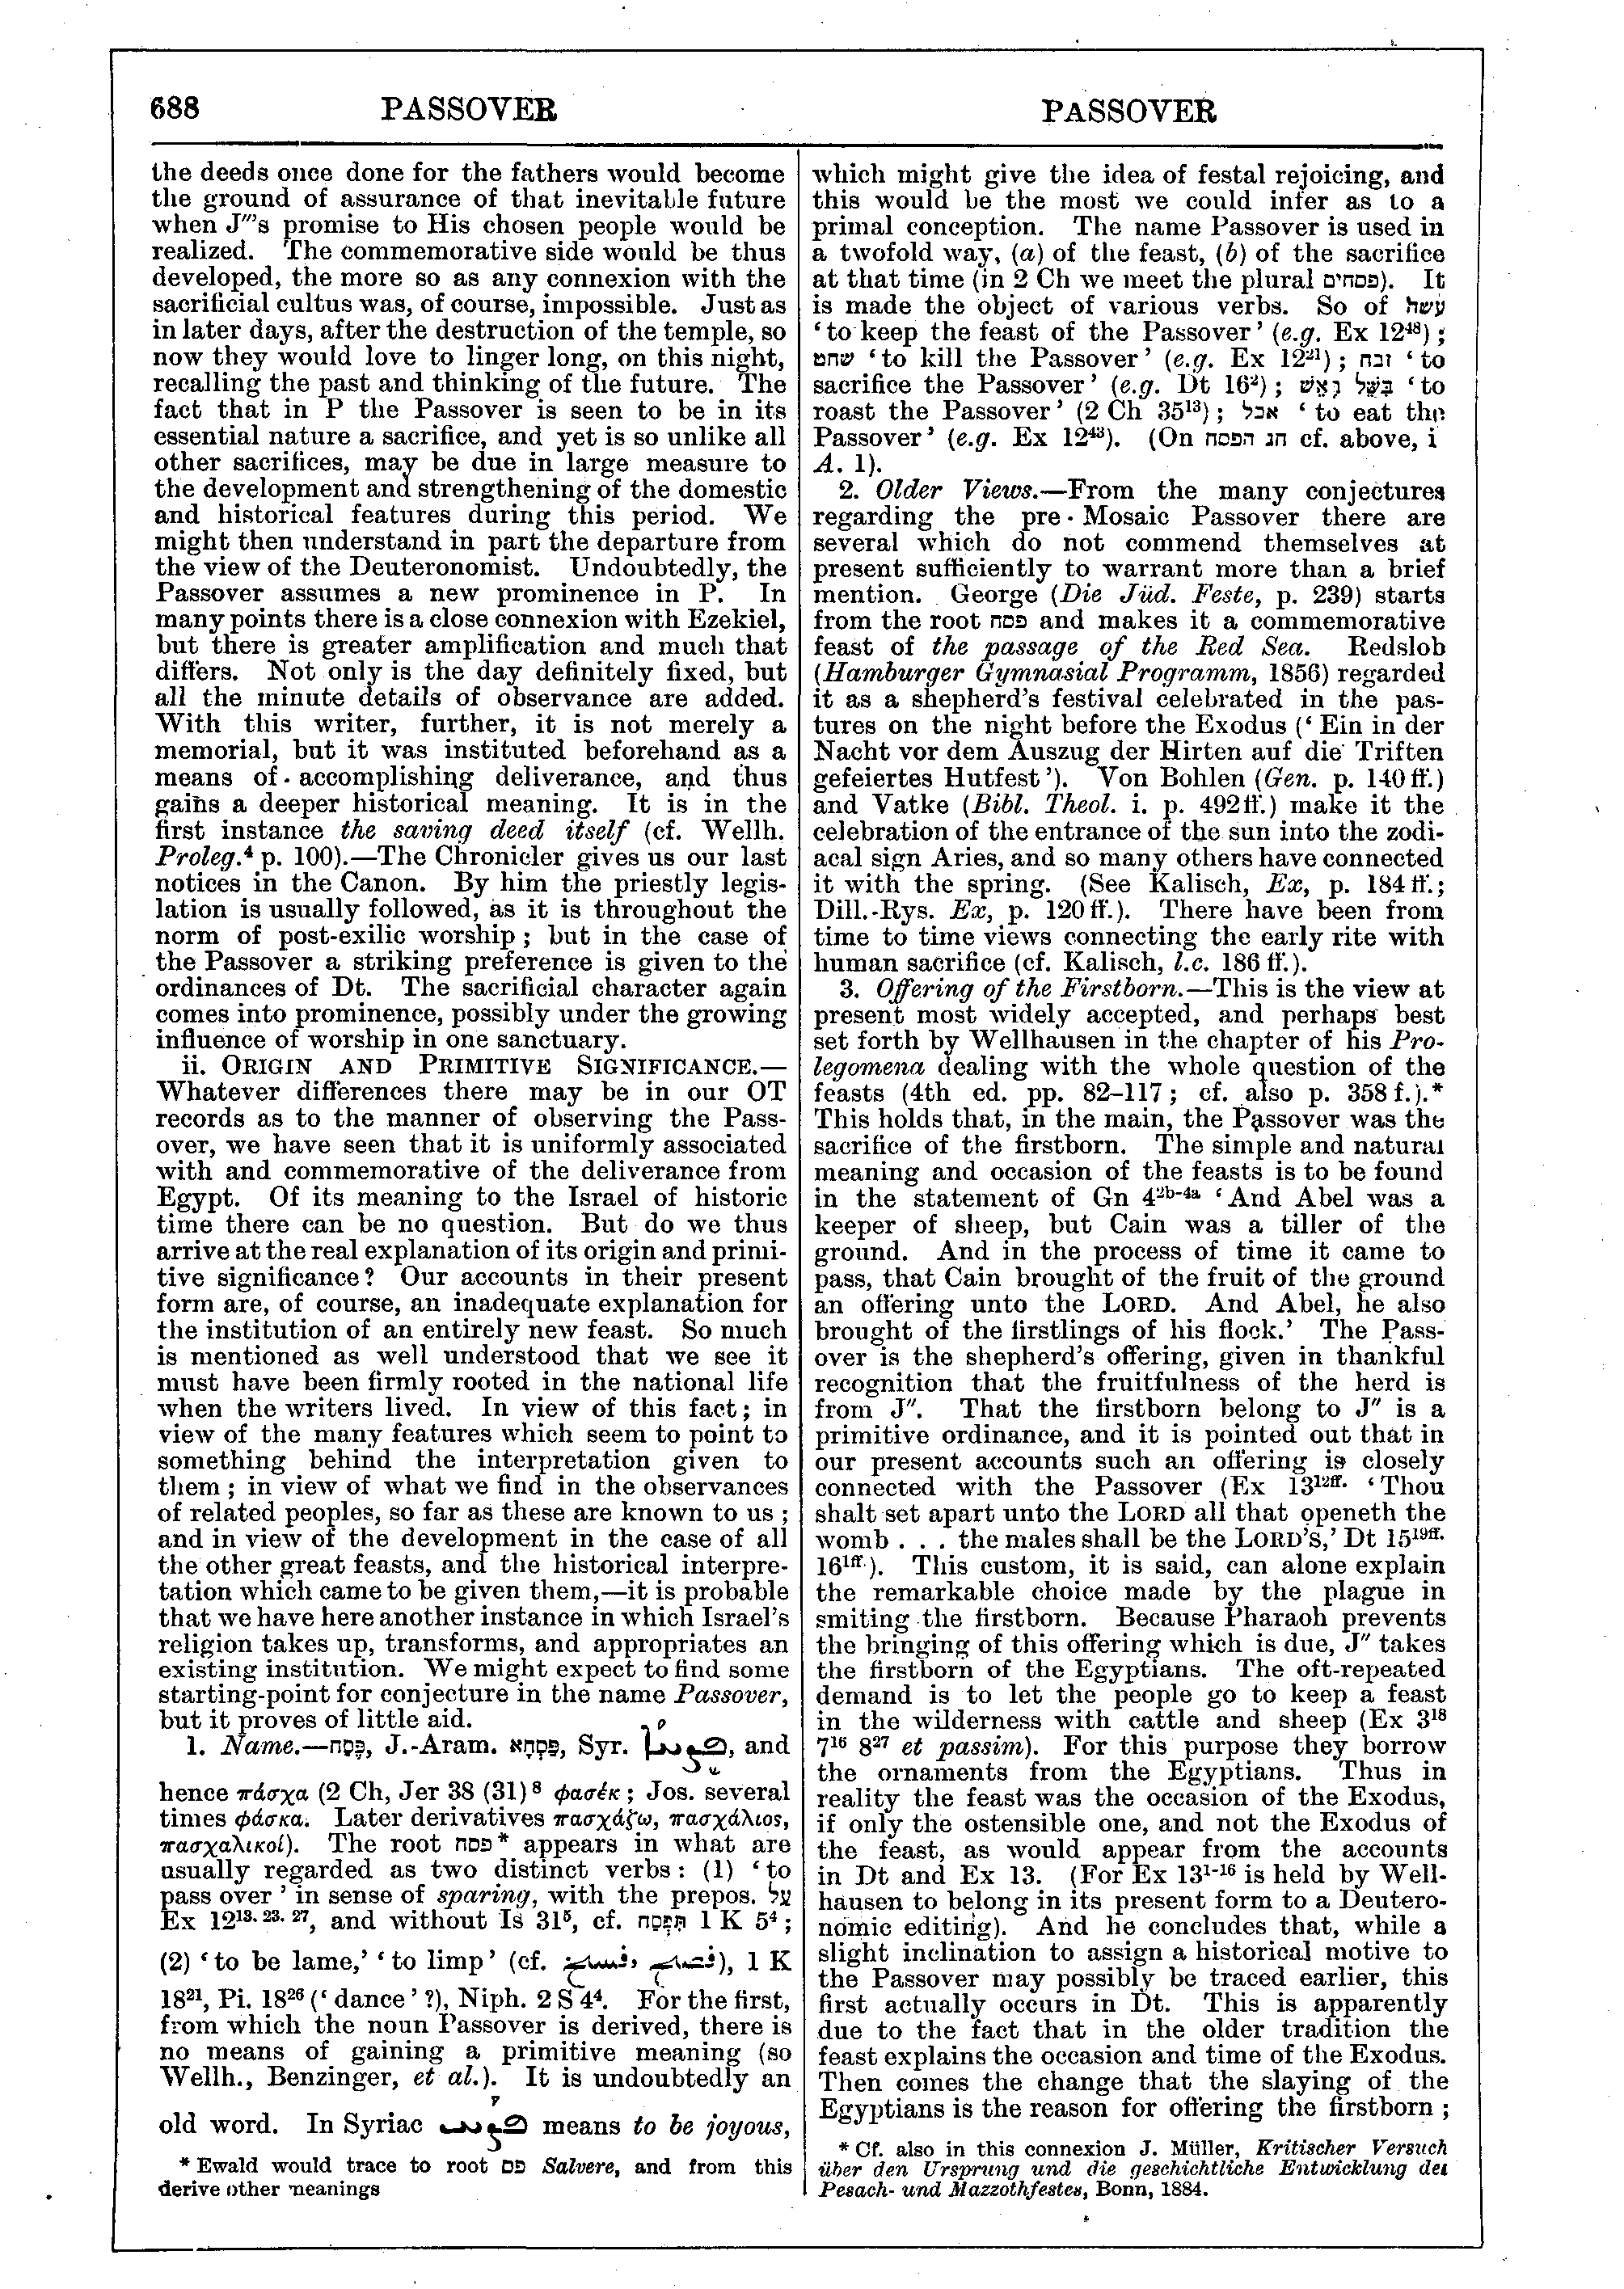 Image of page 688